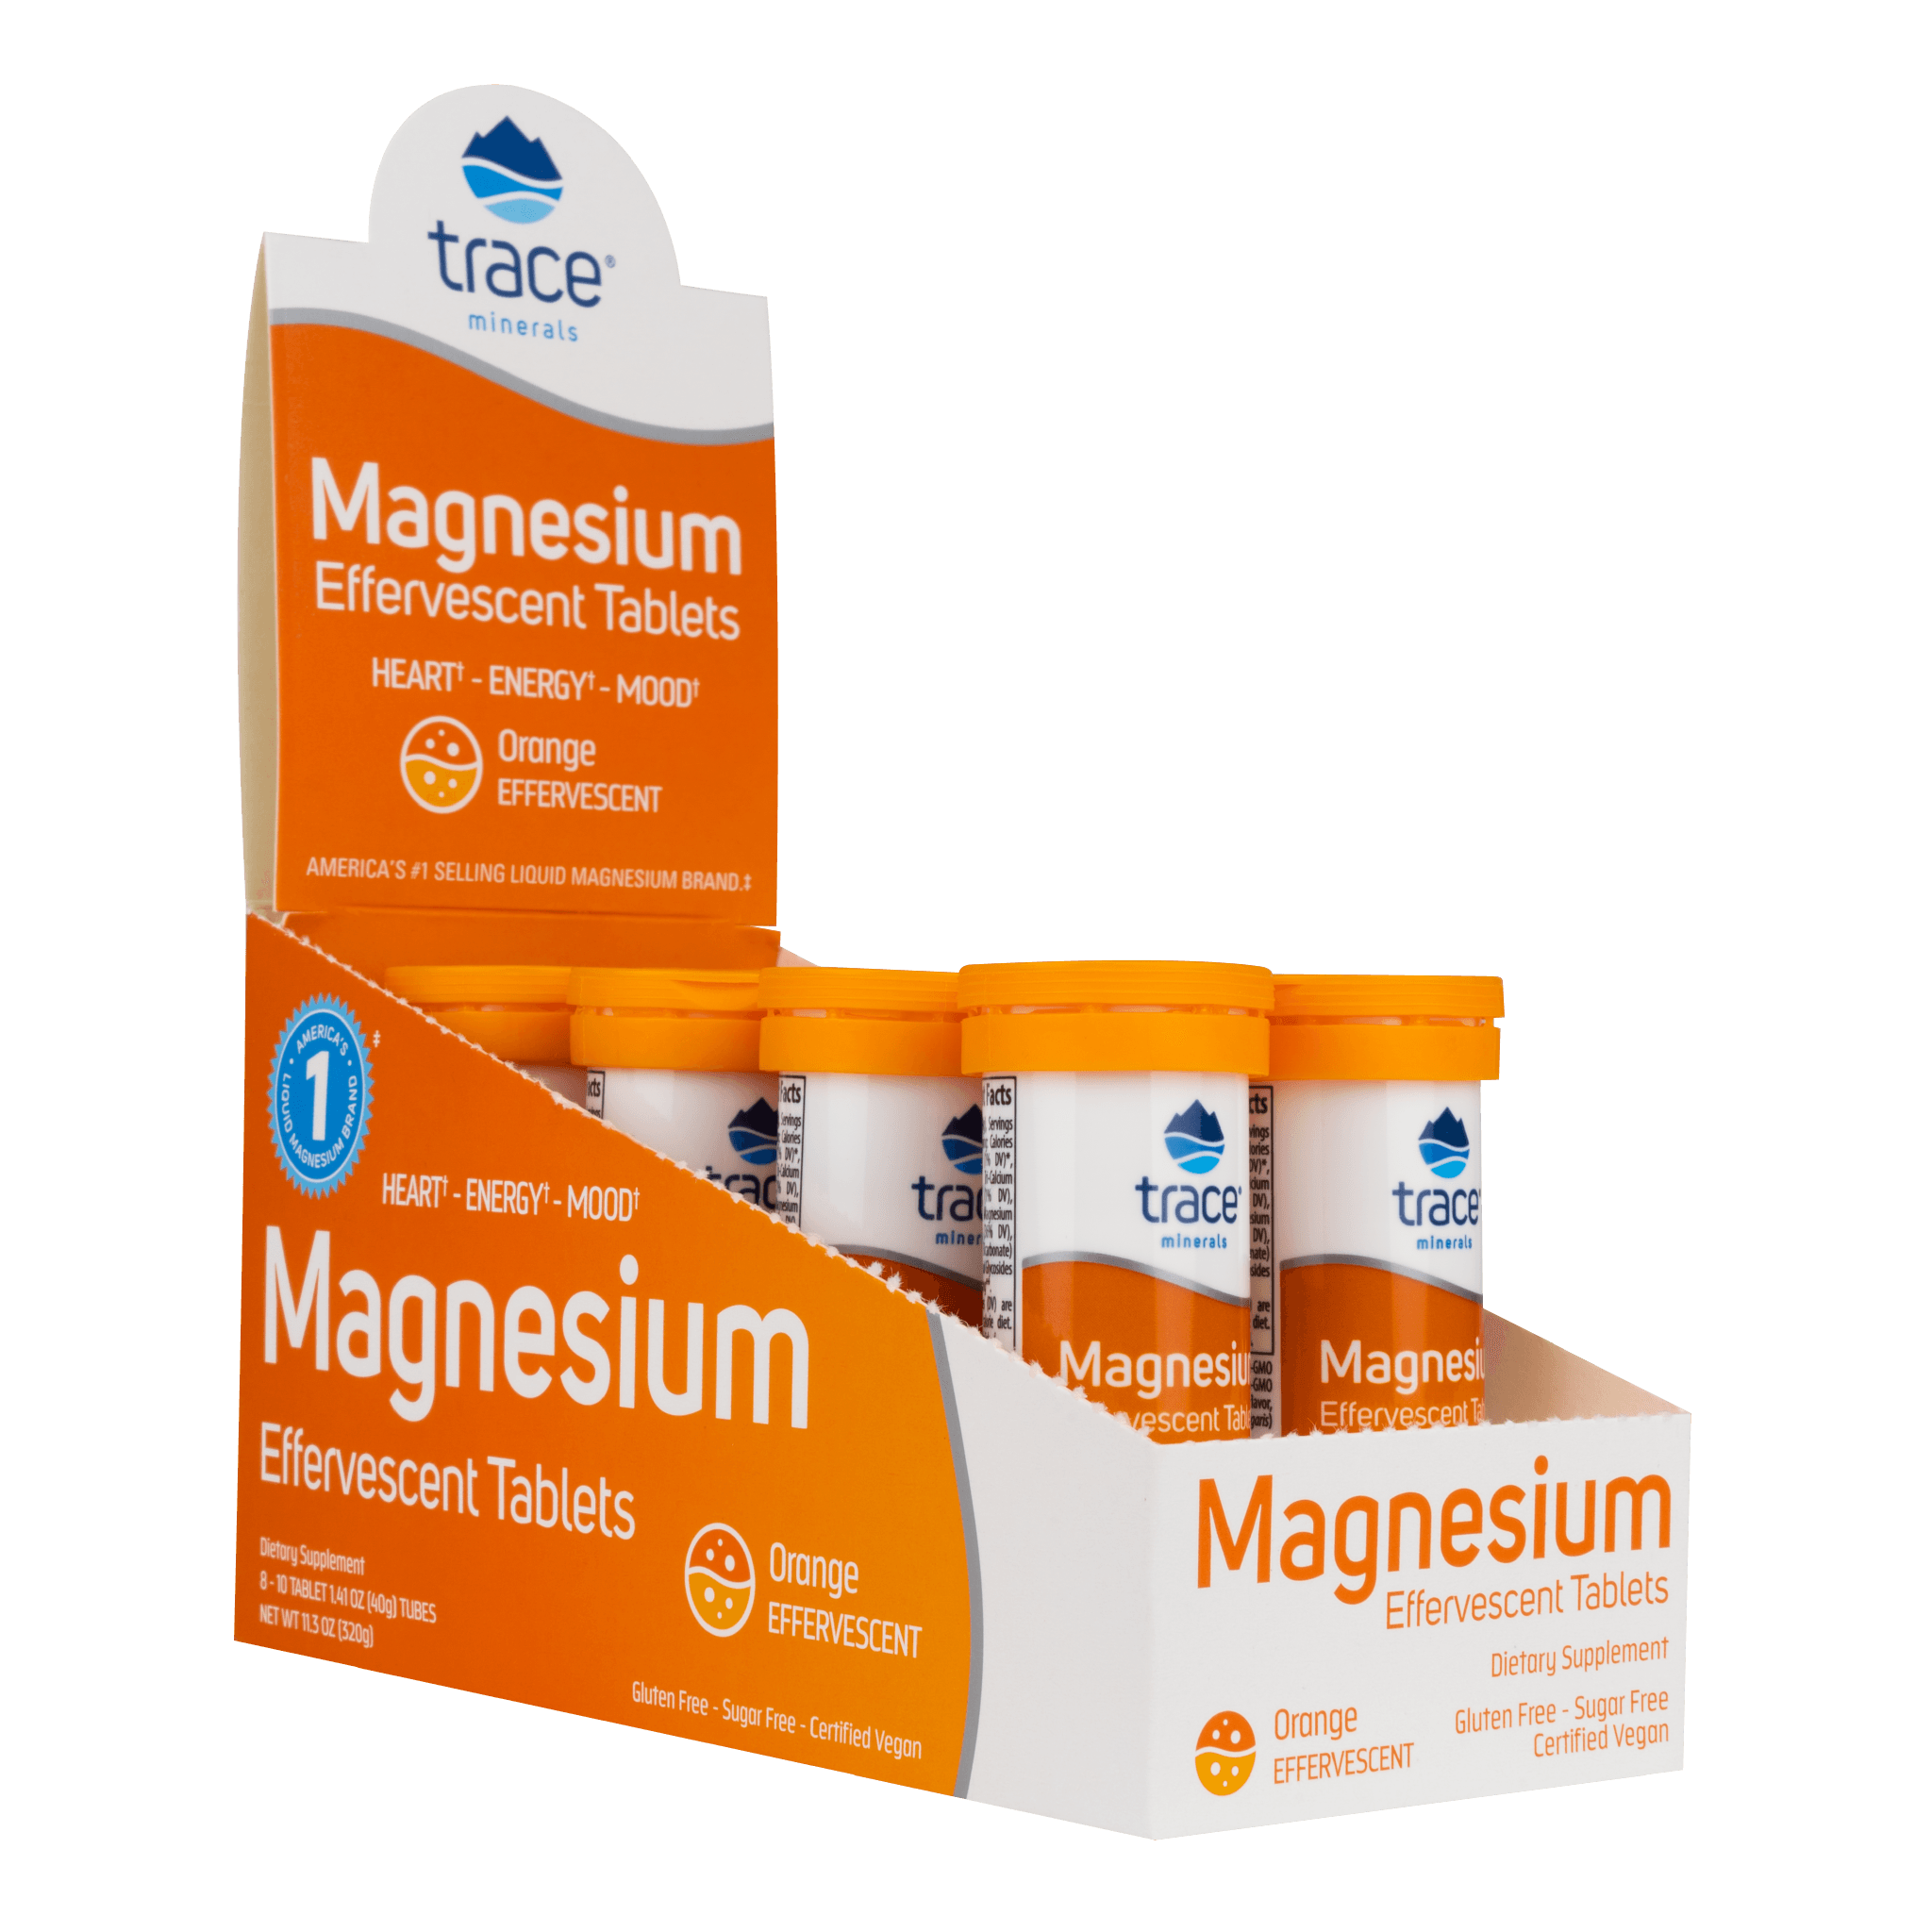 Magnesium Effervescent Tablets - Trace Minerals